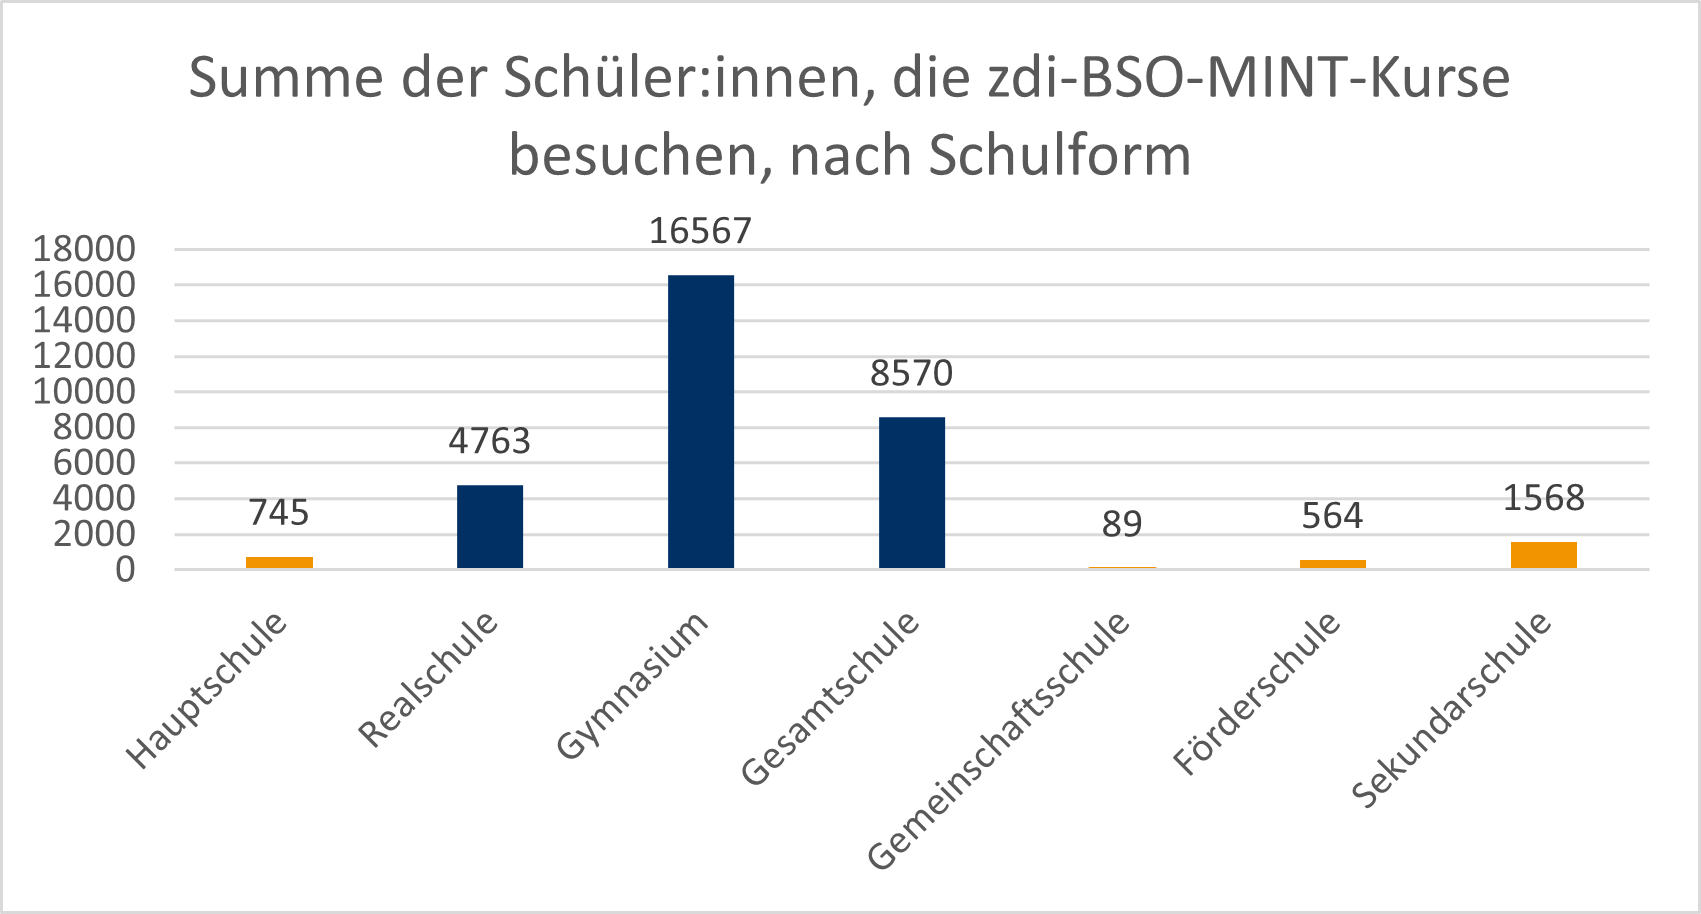 In a bar chart, the graphic shows the sum of the students who attend zdi-BSO-MINT courses by type of school: Hauptschule 745, Ralschule 4.763, Gymnasium 16.567, Comprehensive school 8.570, Community school 89, Special needs school 564, Secondary school 1568